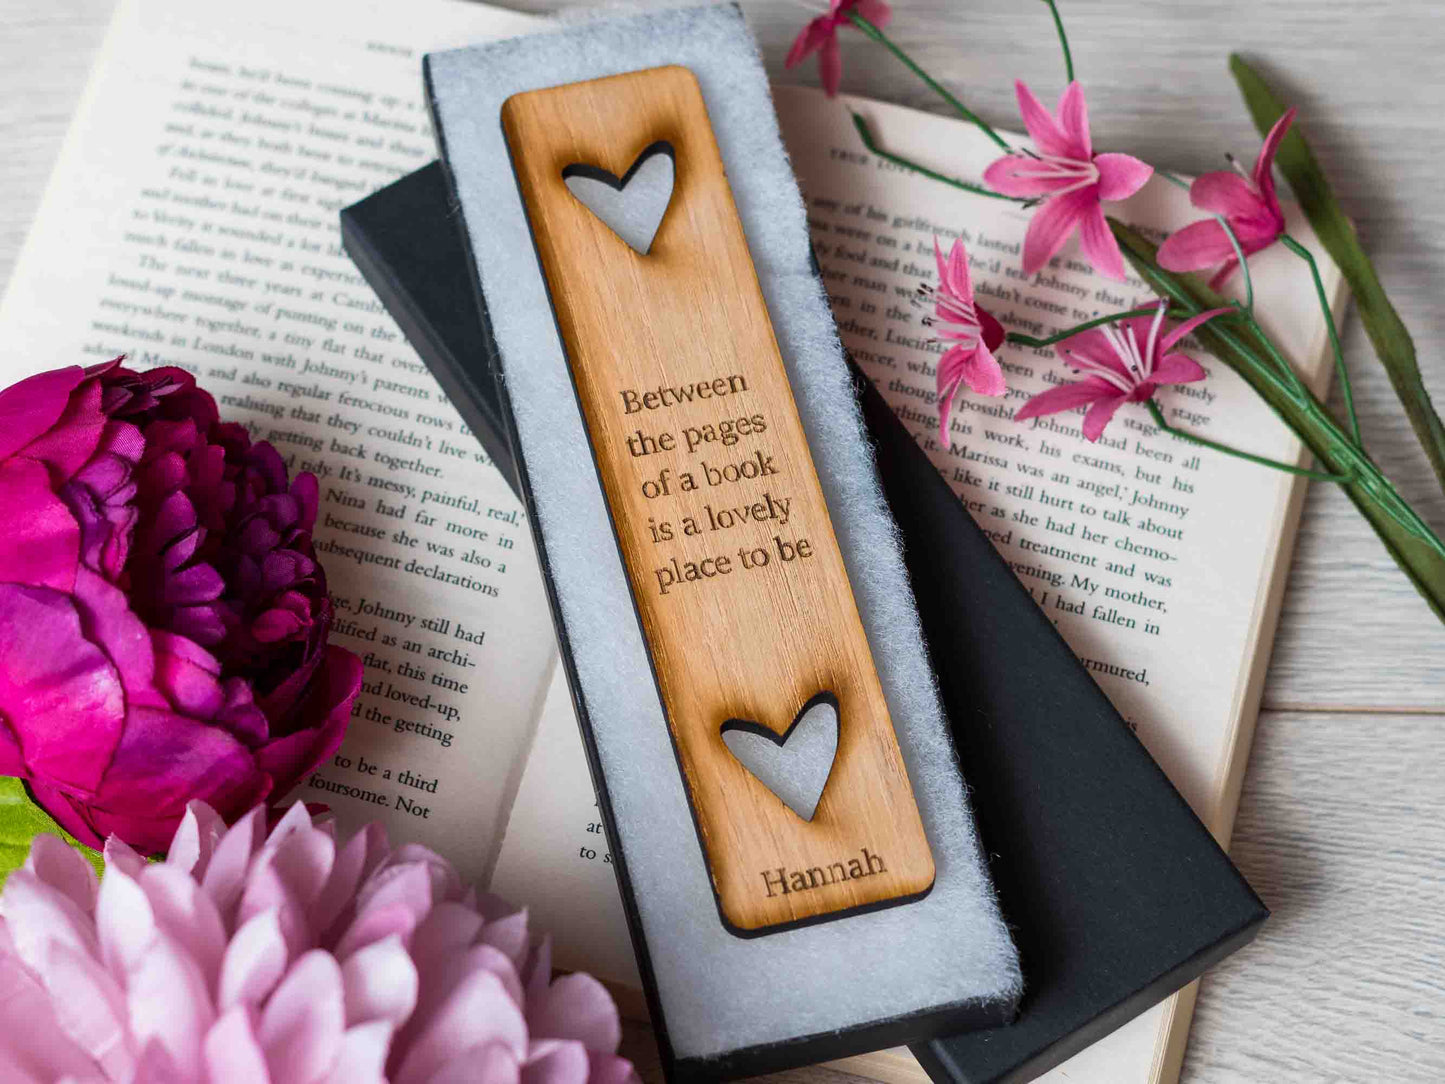 Between the pages quote on personalised bookmark